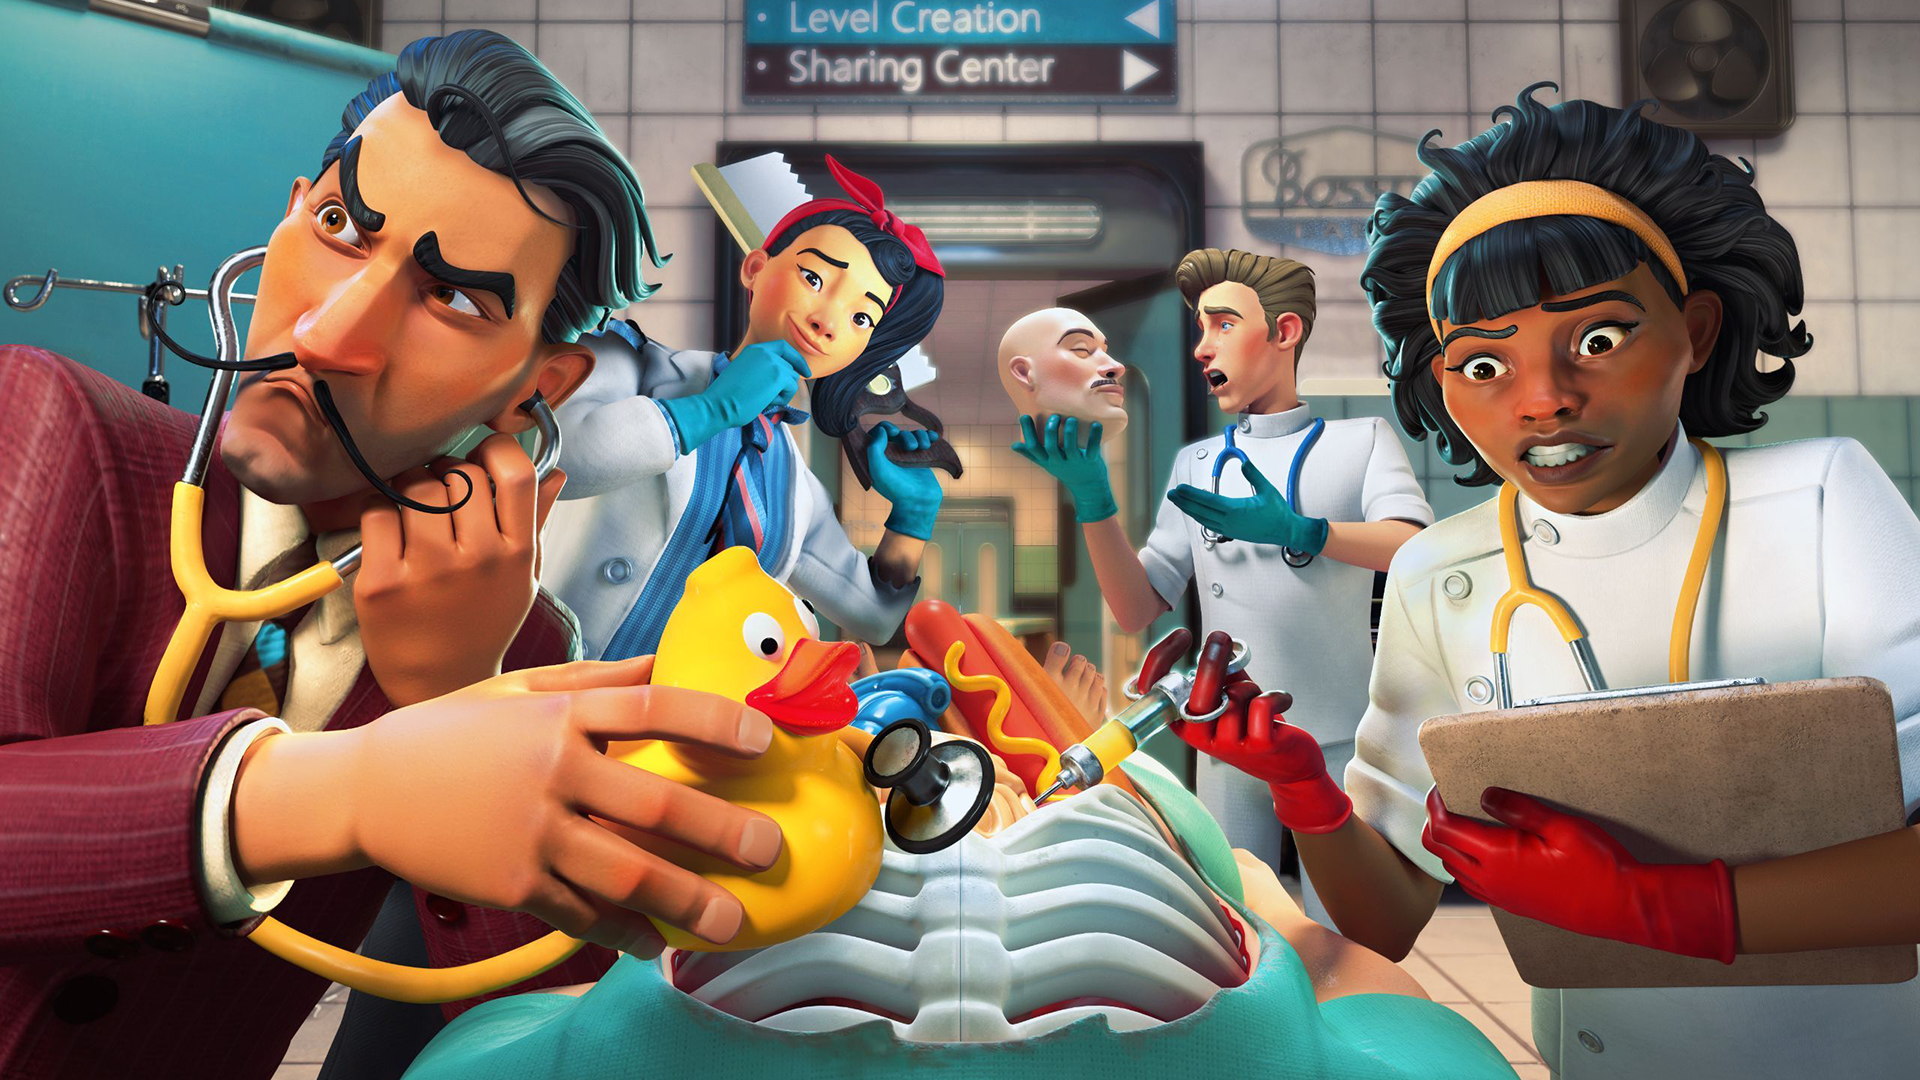 Atari’s Busy Week Gets Busier With Infogrames’ Surgeon Simulator Acquisition